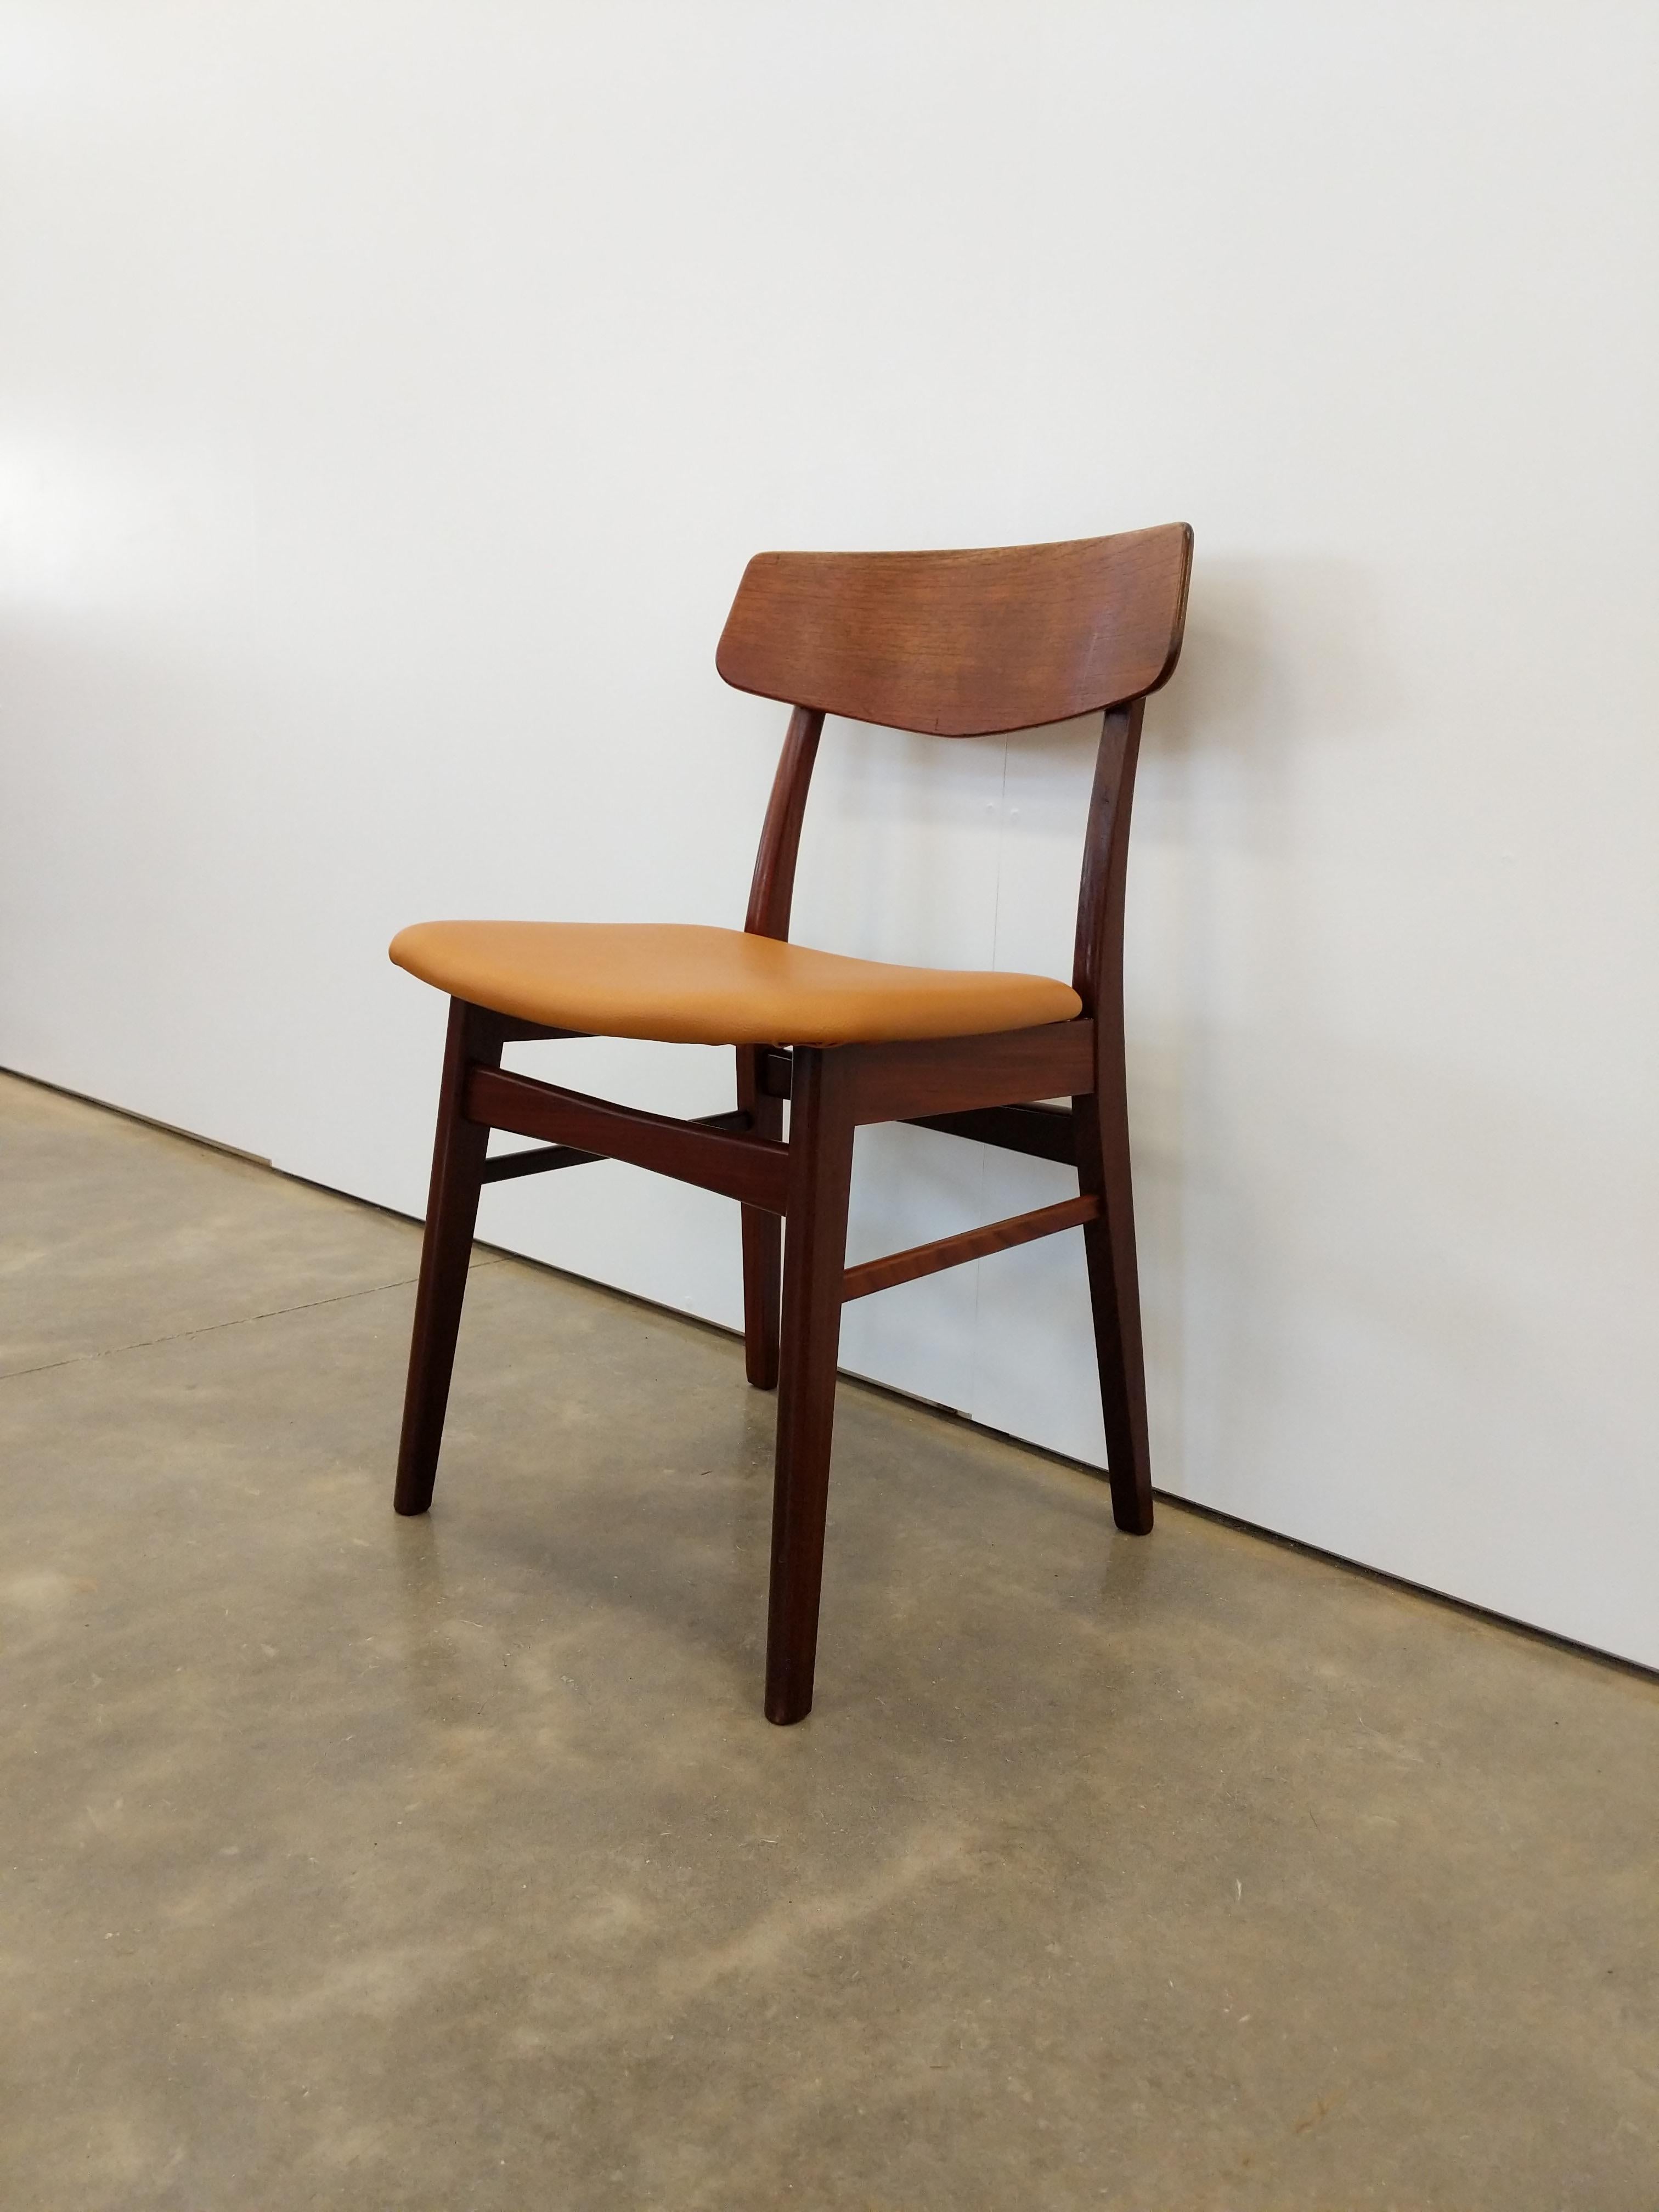 Wood Vintage Danish Mid Century Modern Dining Chair For Sale